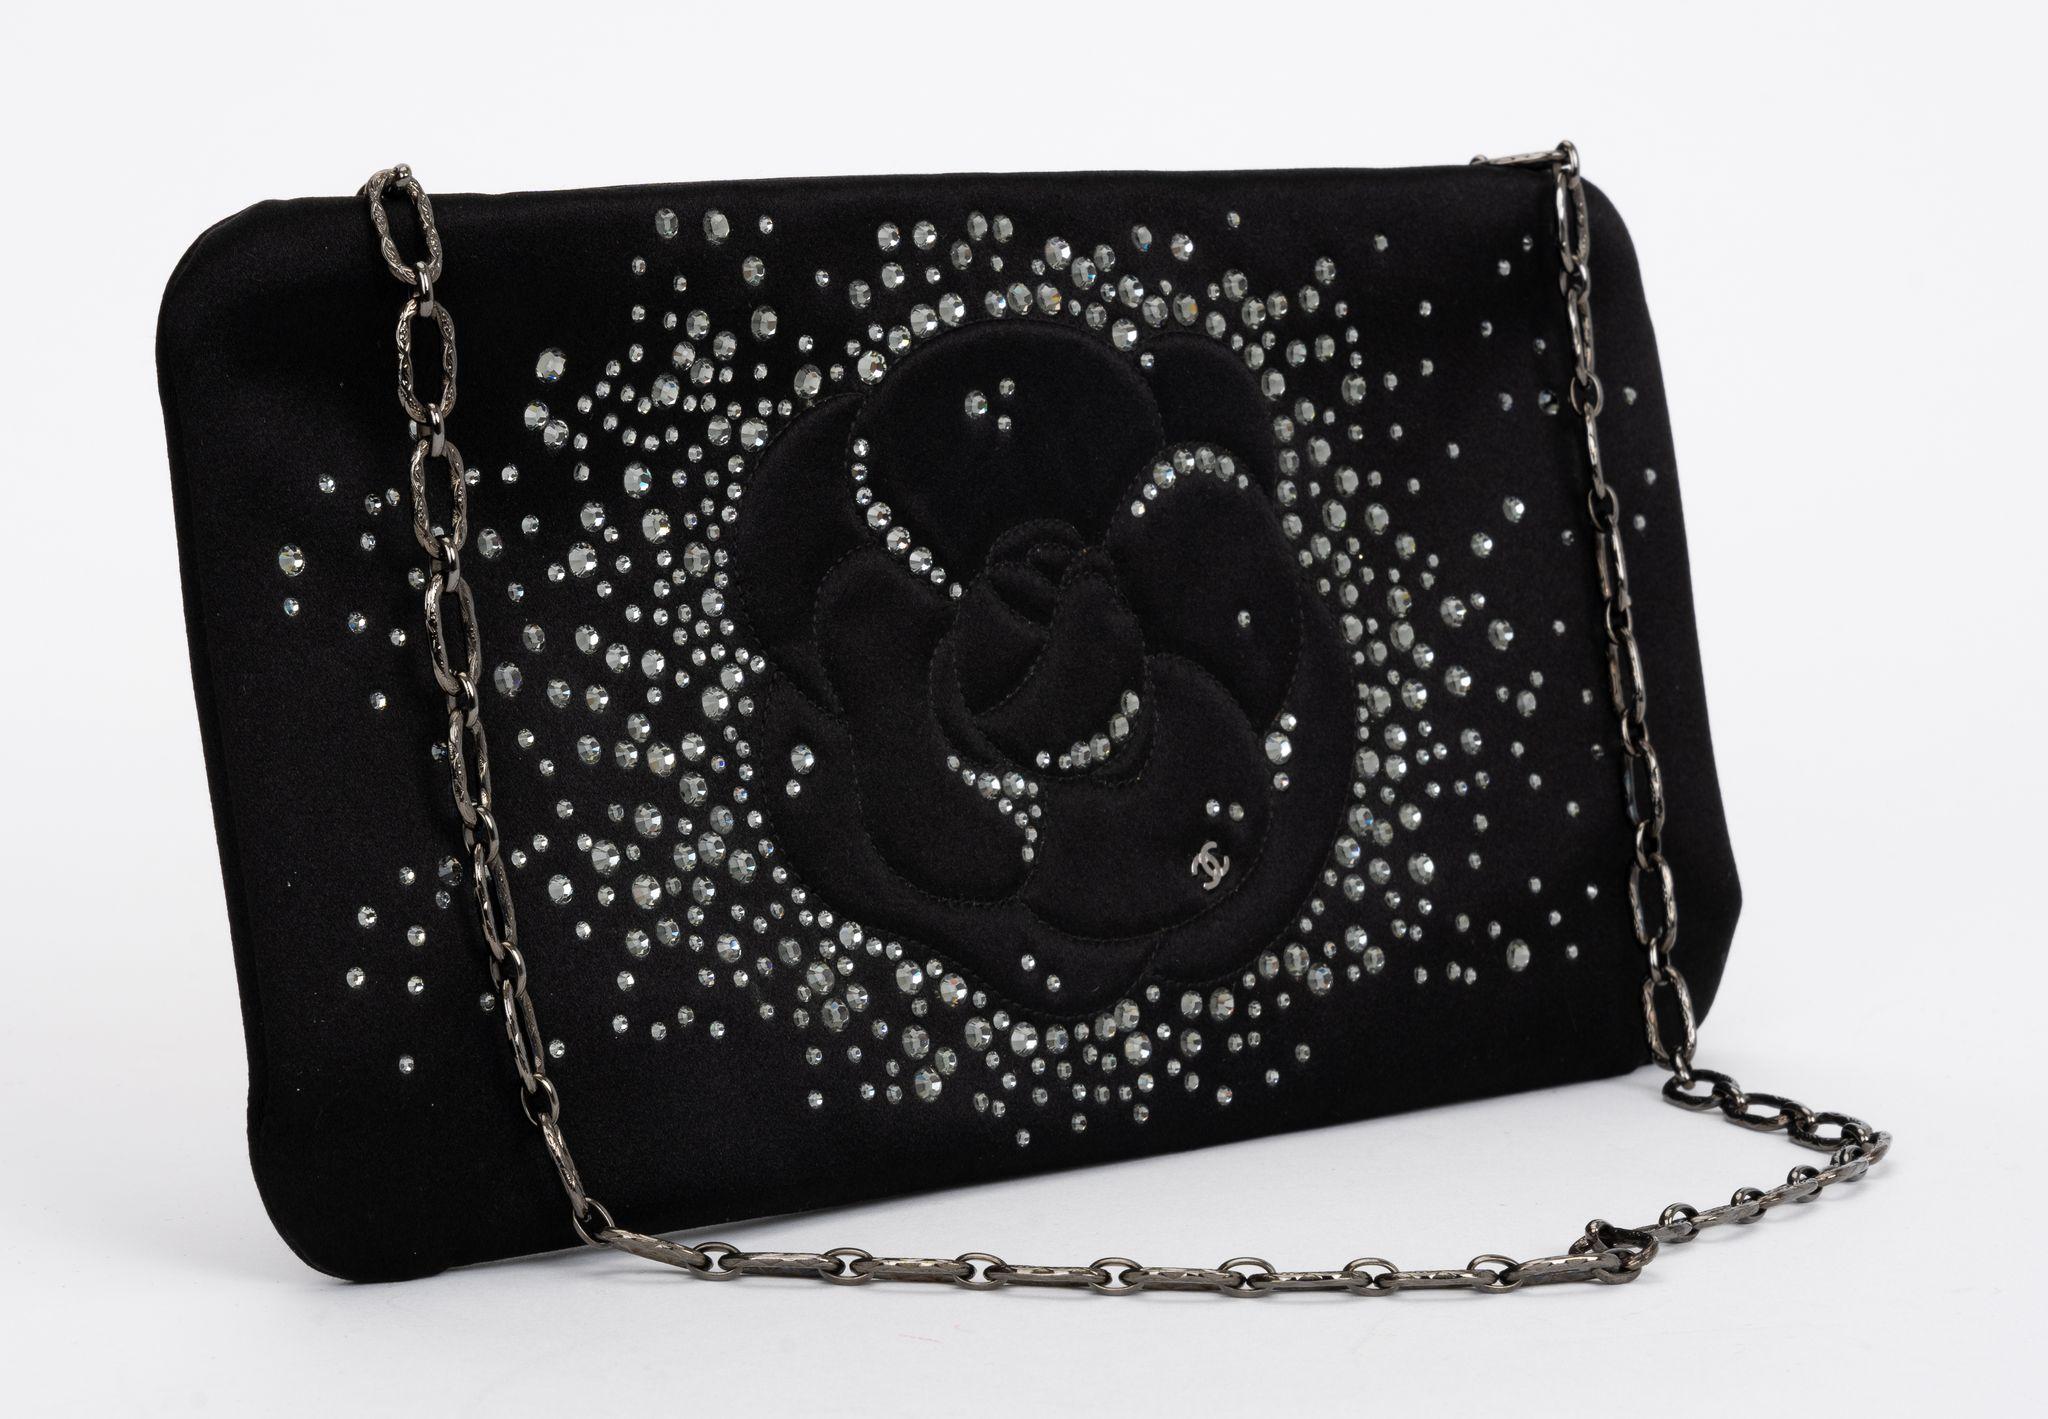 Chanel Black Clutch from the Spring/Summer 2010 Collection 
by Karl Lagerfeld. Features silver-tone hardware a chain-link shoulder strap
and crystal embellishments. Satin lining and single interior pocket.
Collection 13. Comes with hologram and